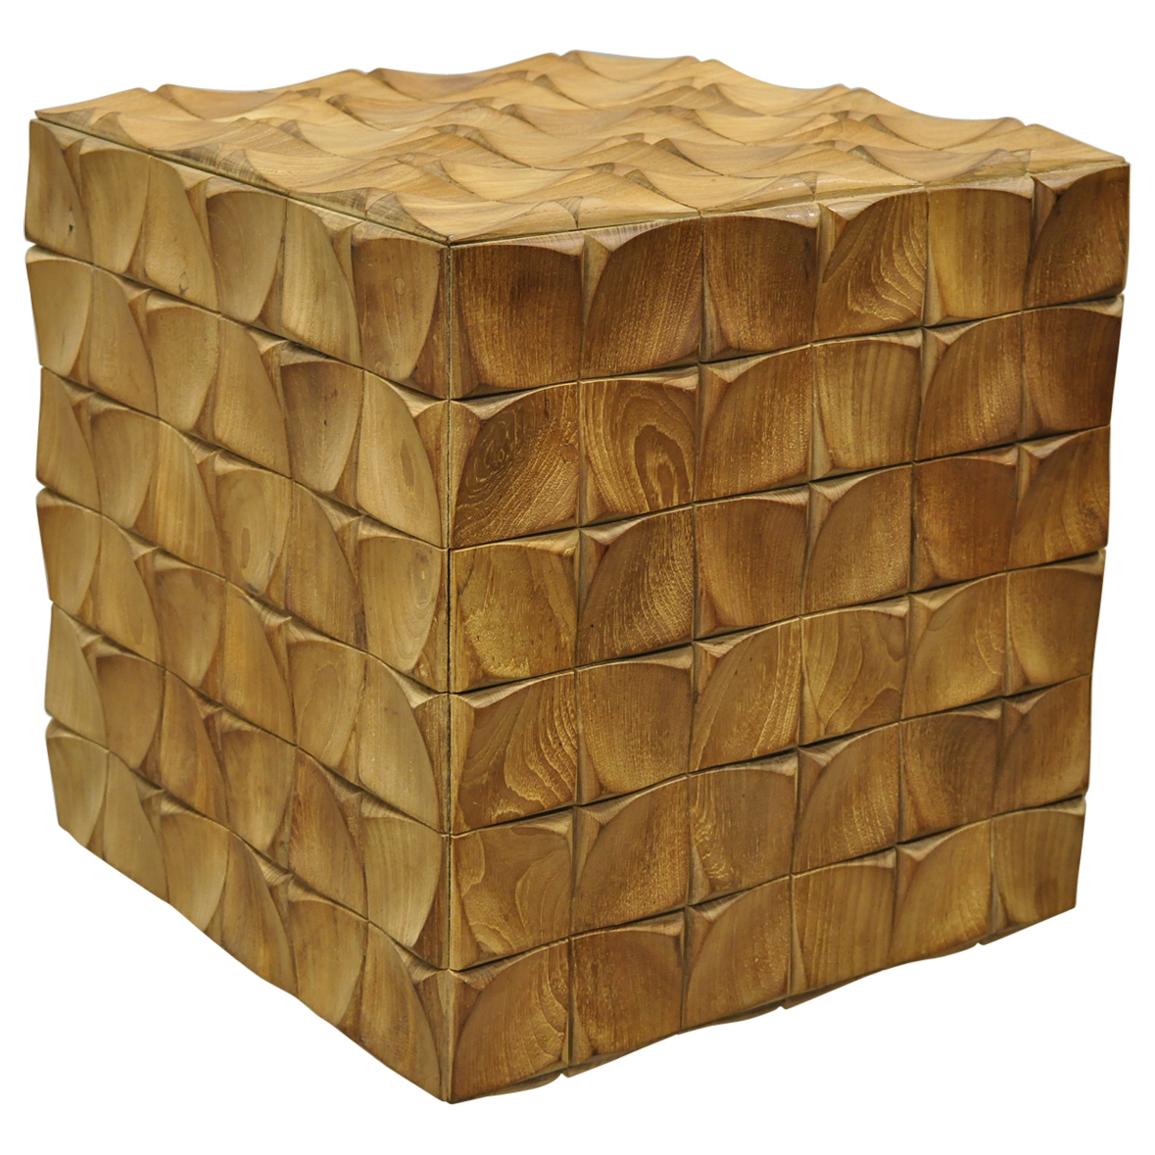 3 Dimensional Geometric Wood Carved Modern Cube Ottoman Stool Square Side Table For Sale